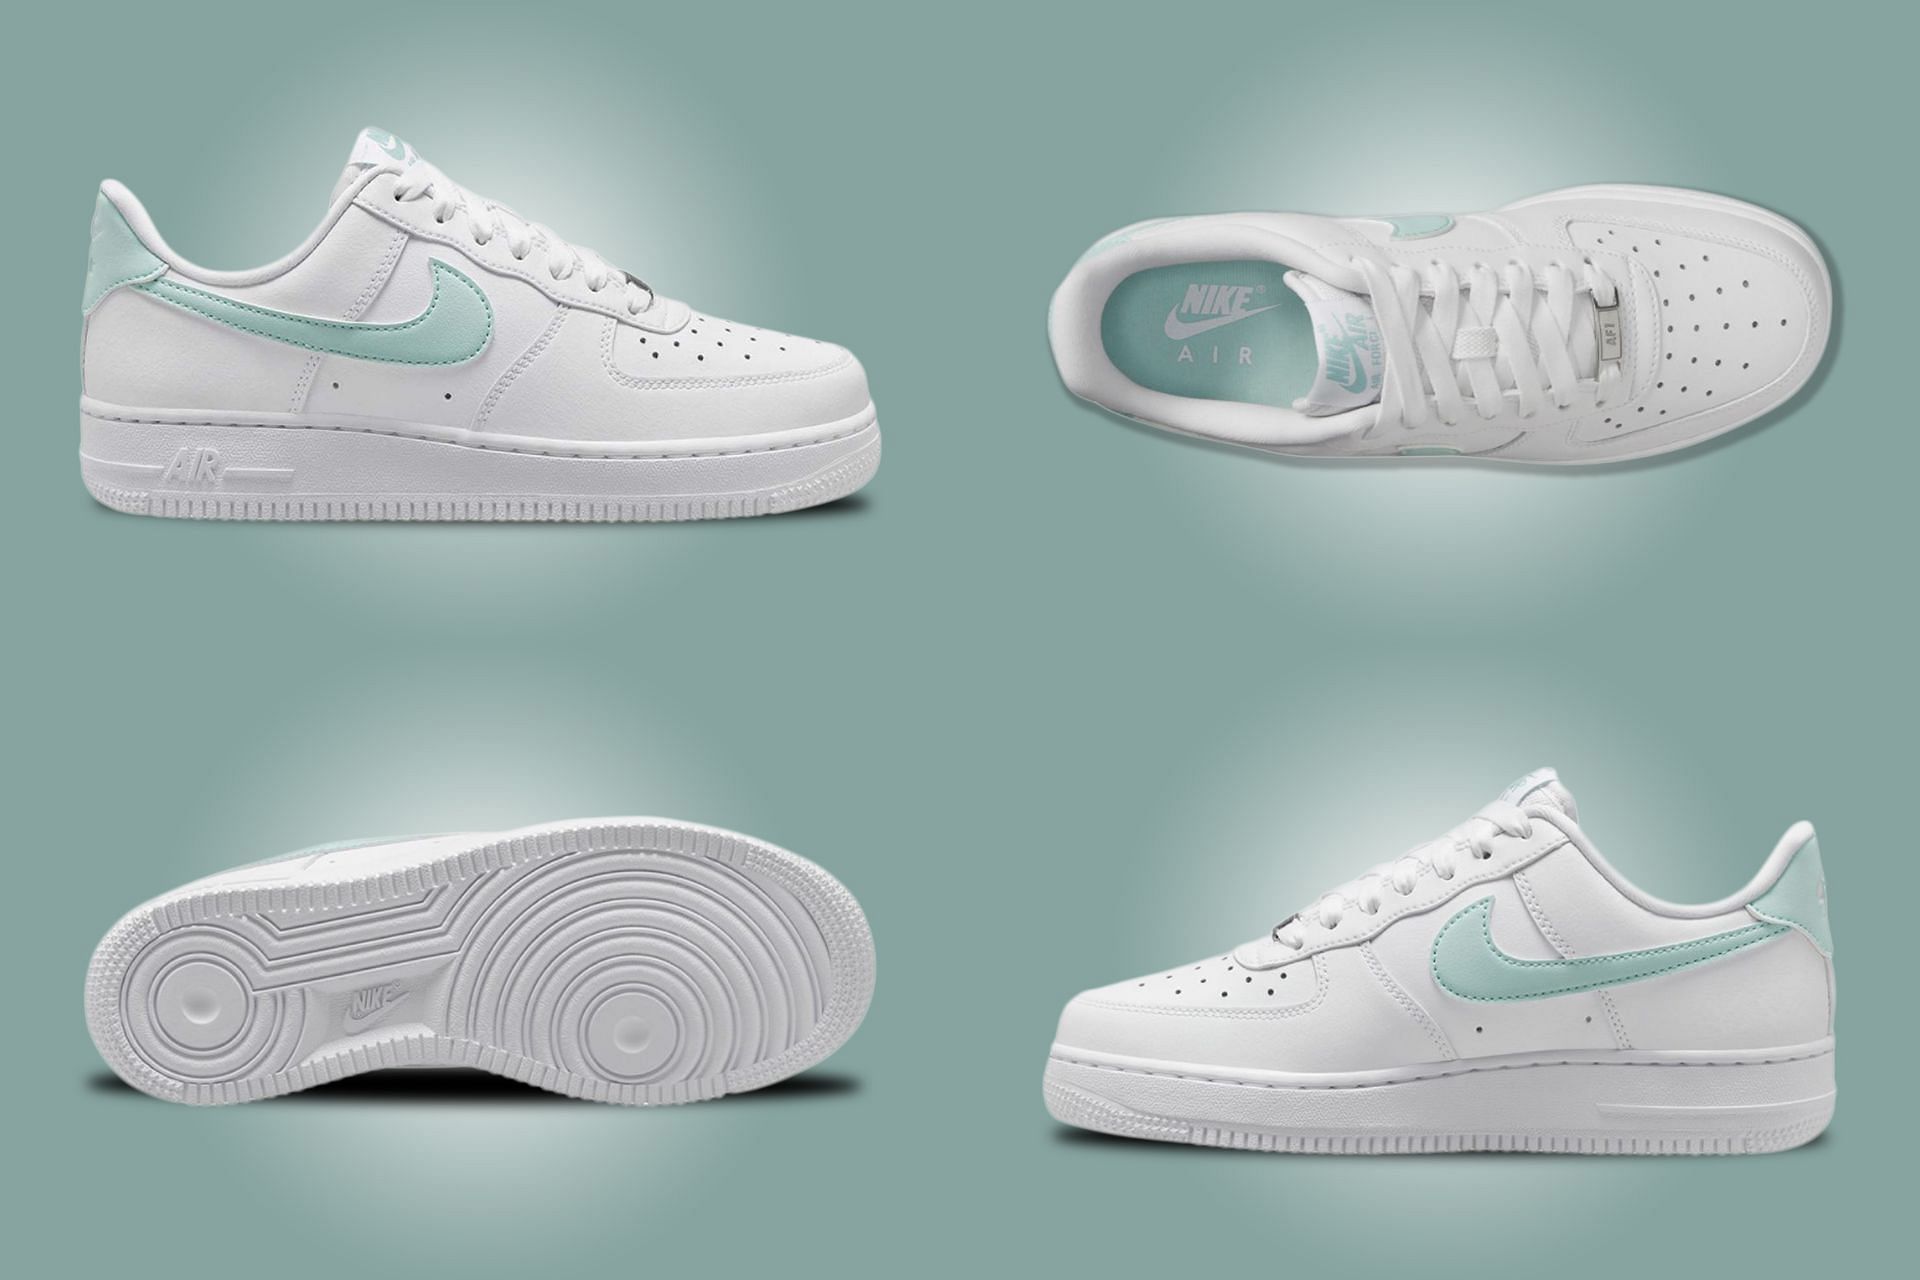 Air Force 1 Low "Jade Ice" (W) Sneakers: Where to buy, price, and